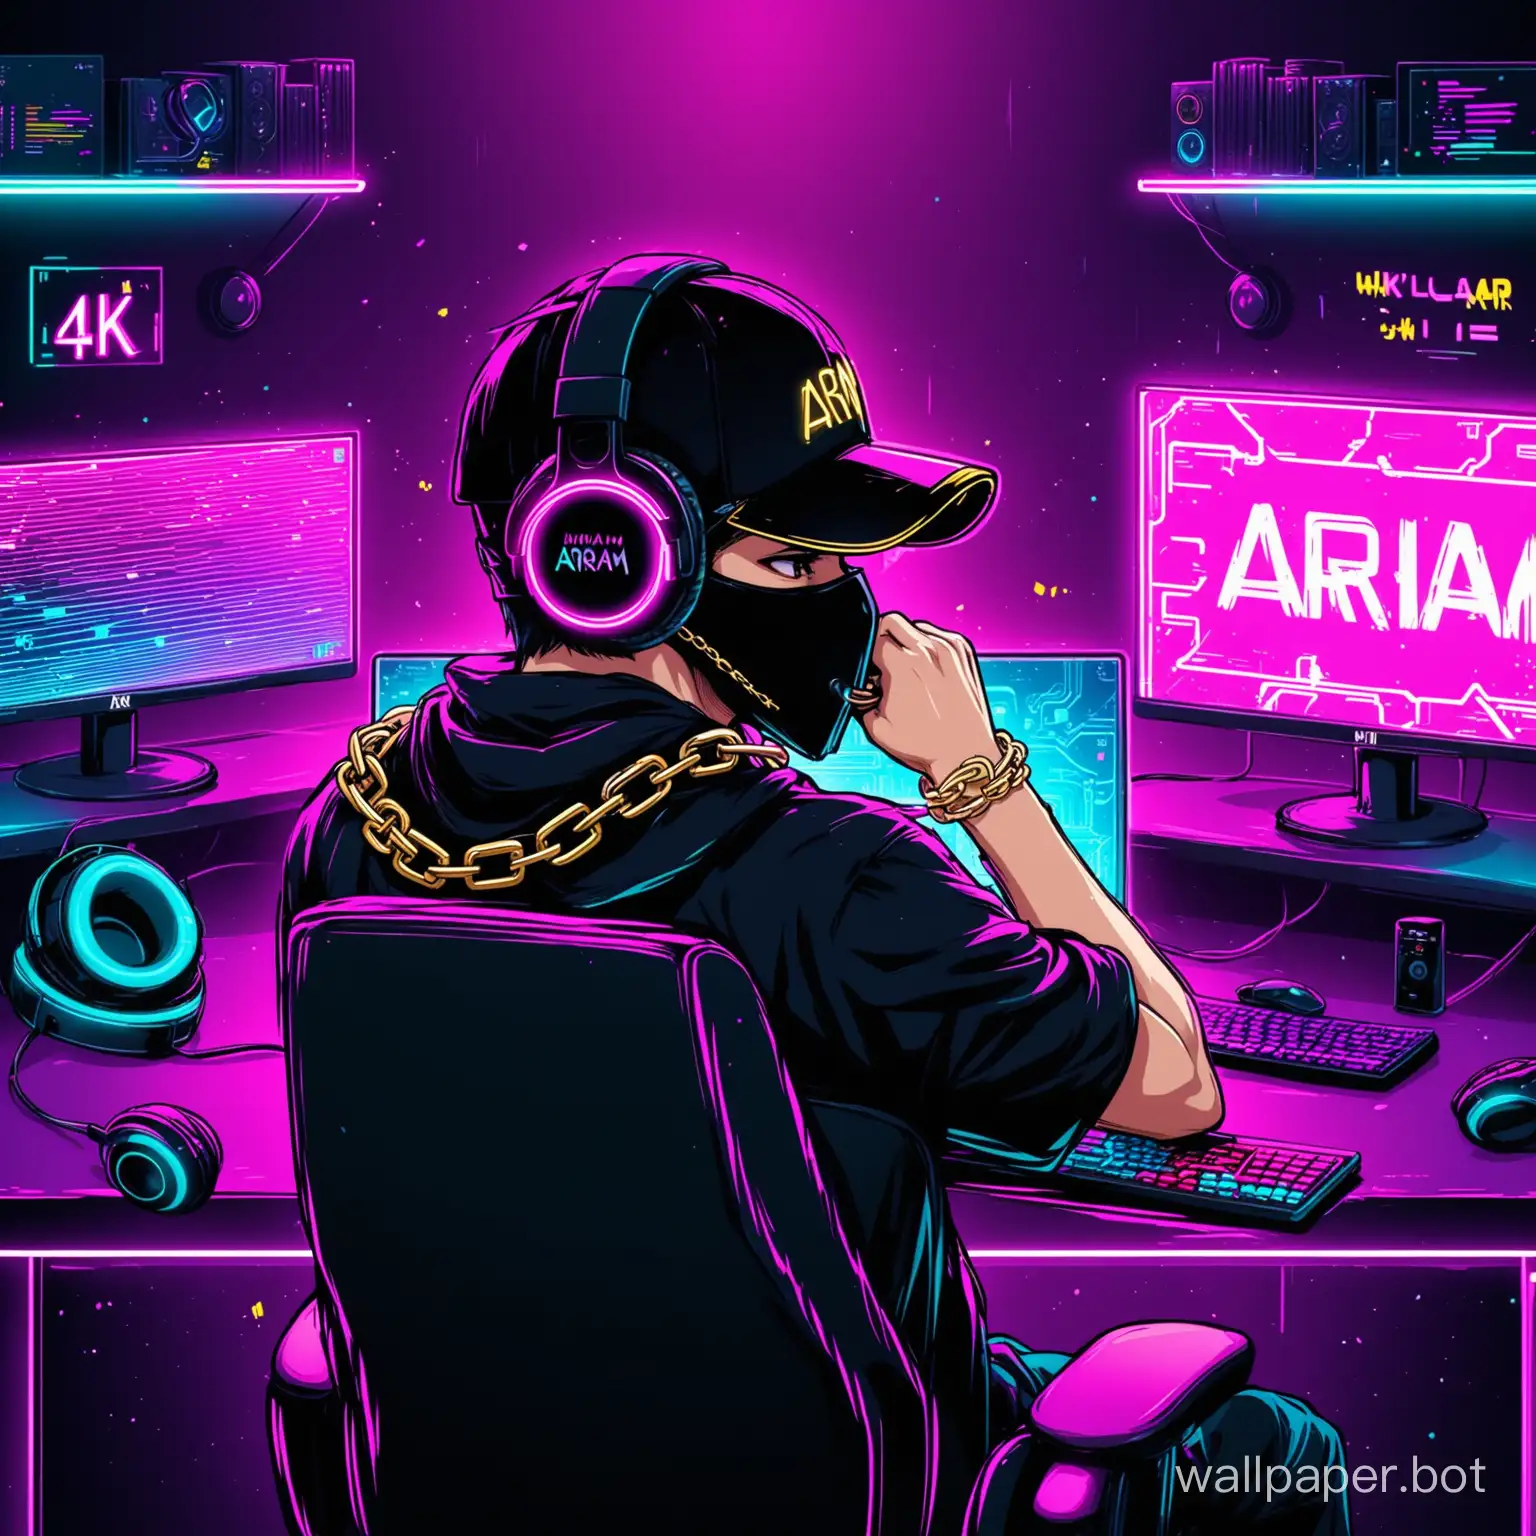 create a 4k wallpaper for laptop where a boy is playing games on pc wearing a headphone, cap or a gold chain hide her face to a black mask sit on the gaming chair back ground features Arnam in the neon fonts